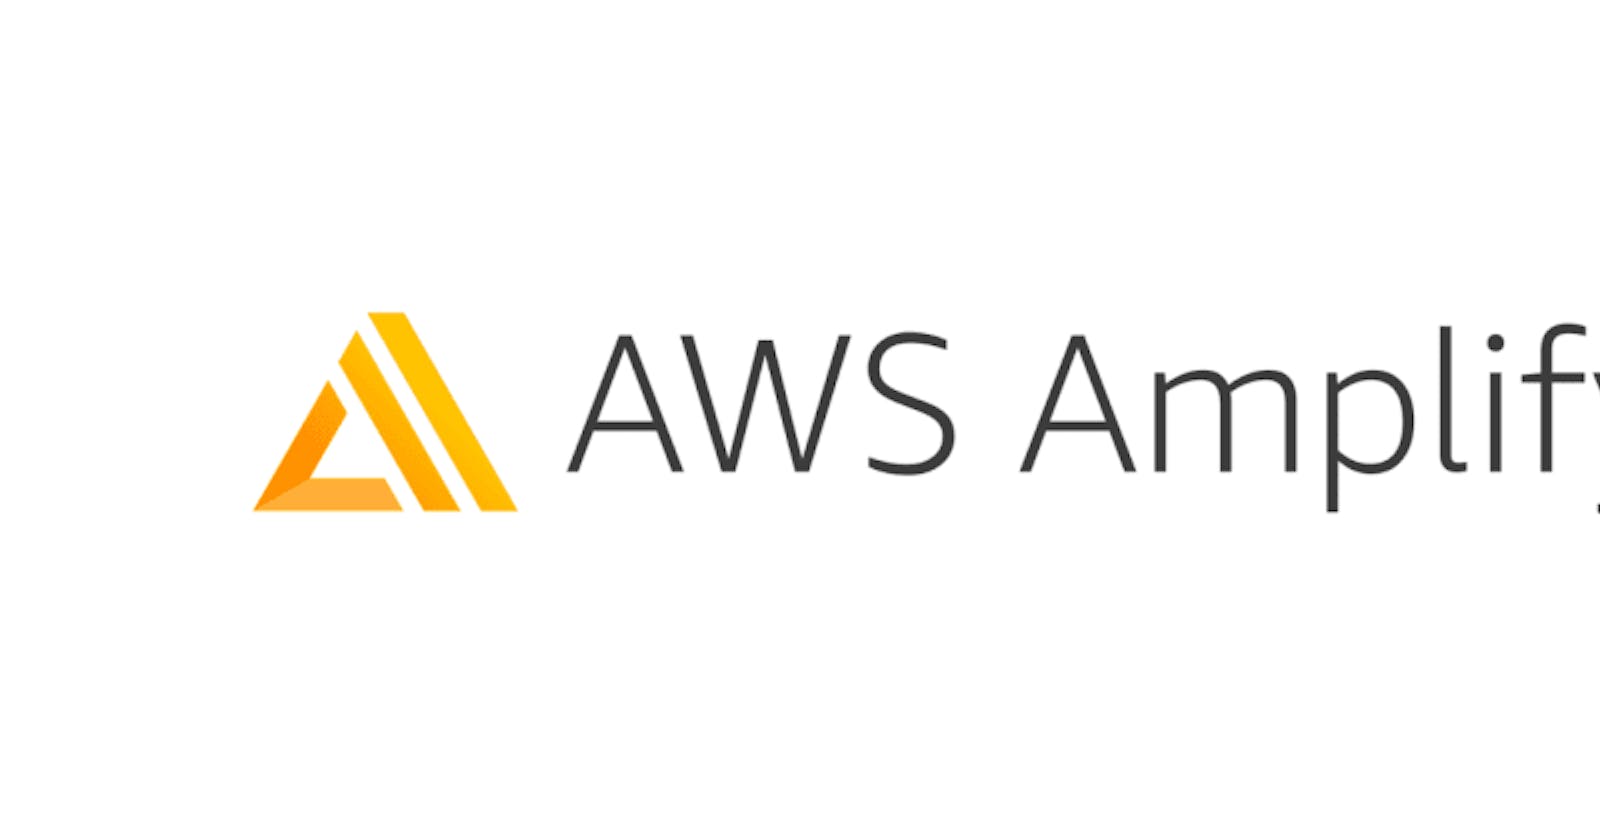 What is AWS Amplify